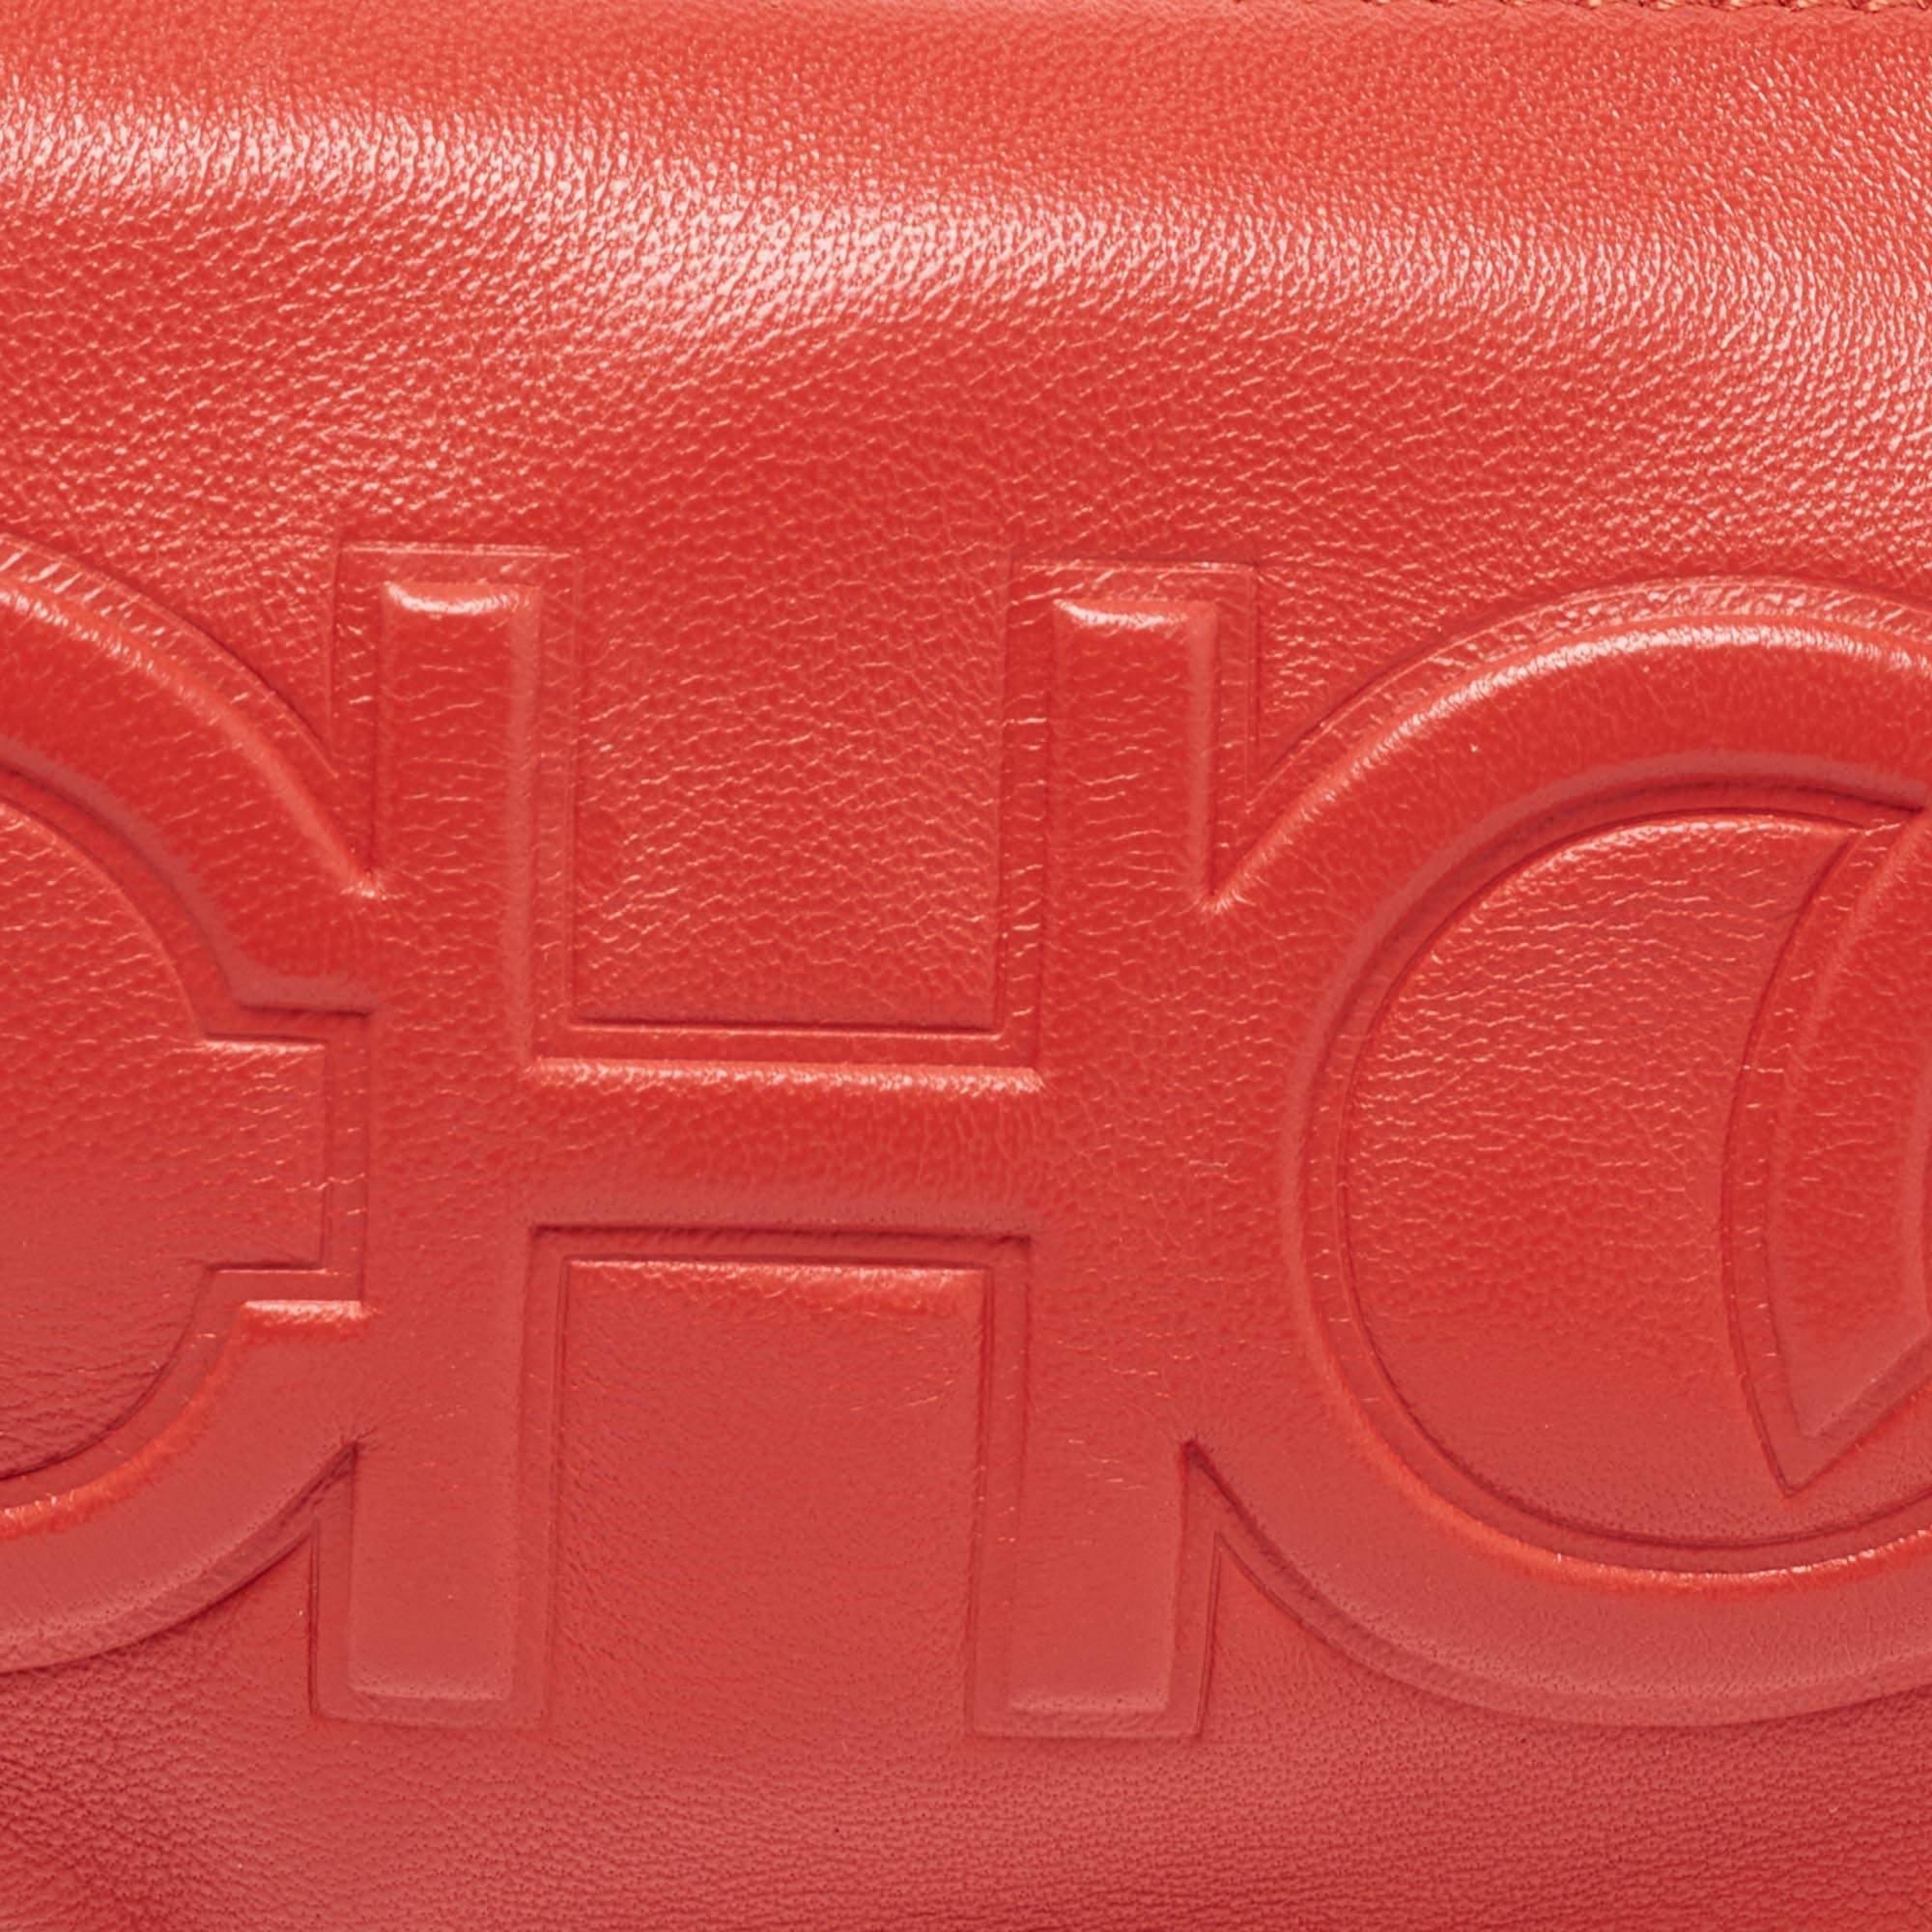 Jimmy Choo Red Leather Half Moon Zip Bag For Sale 1